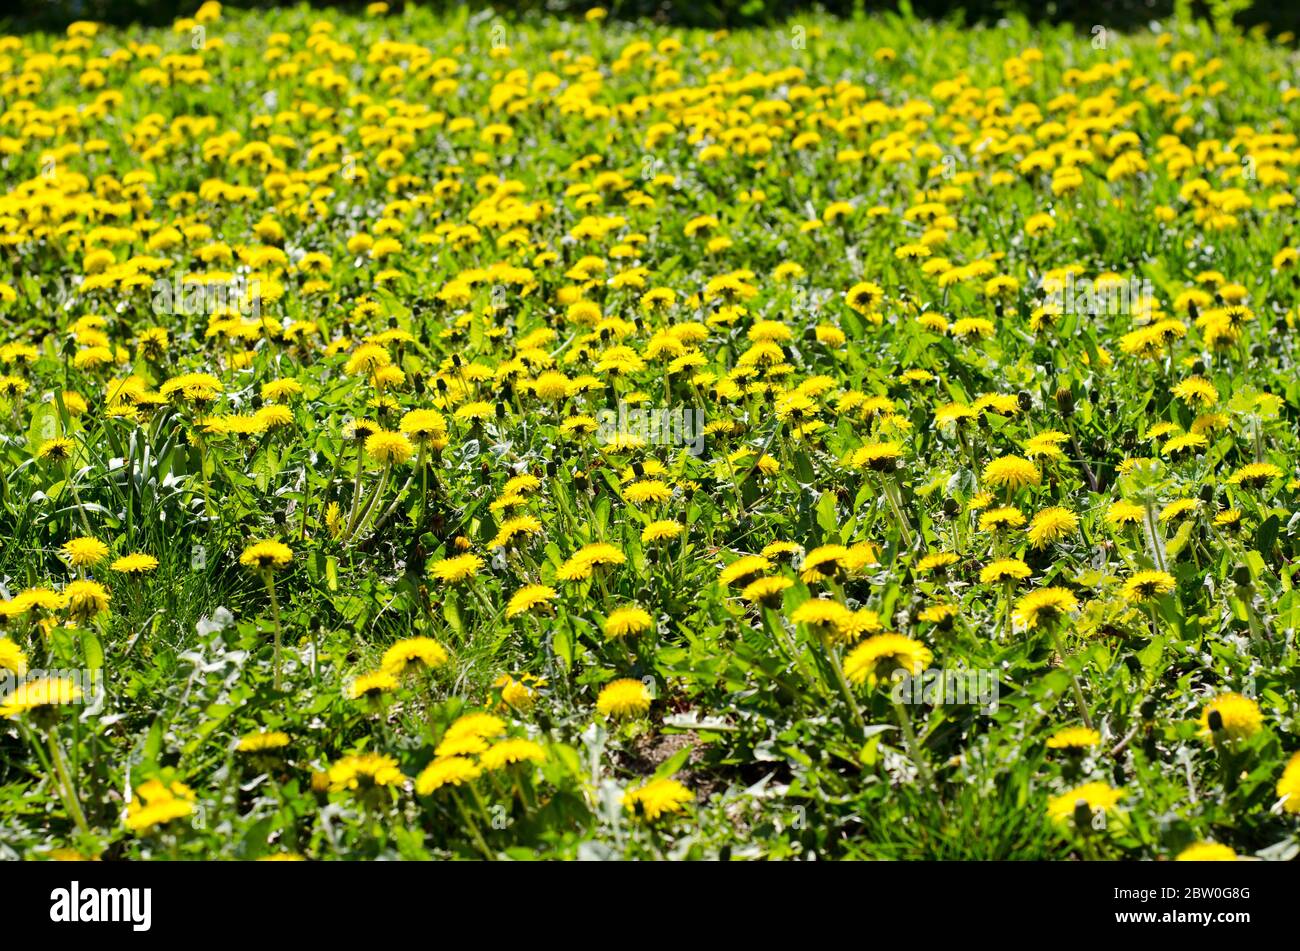 Dandelions, Taraxacum officinale, blooming on a sunny day in april Stock Photo